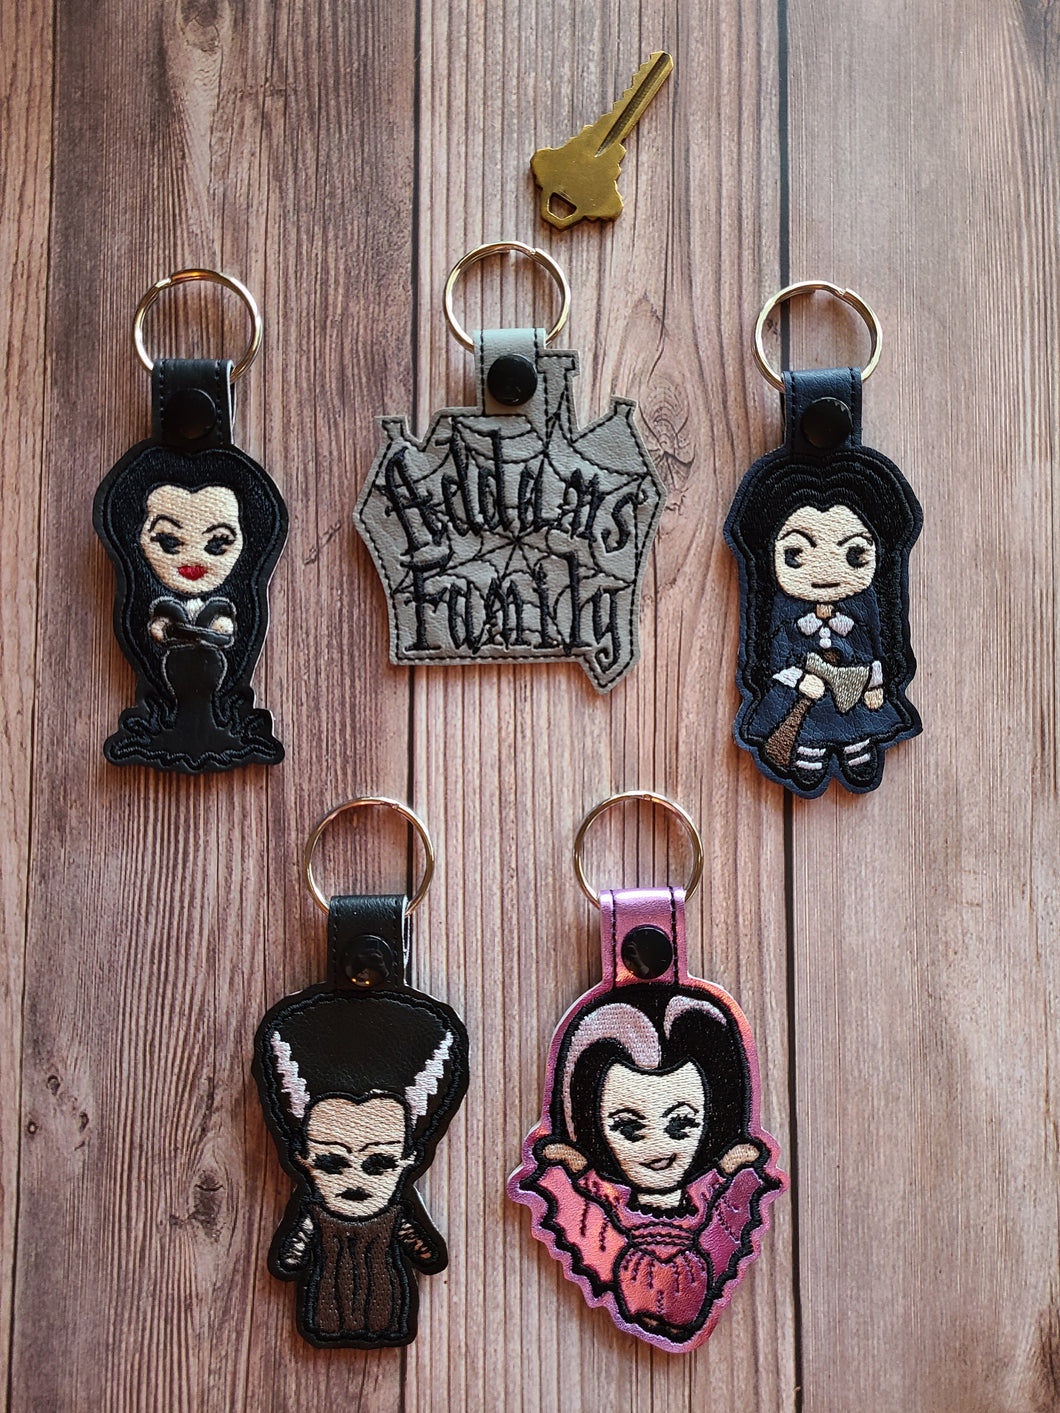 Chibi Key Fobs Inspired By Female Horror Characters - Keychains - Backpack Decoration - Bag Bling